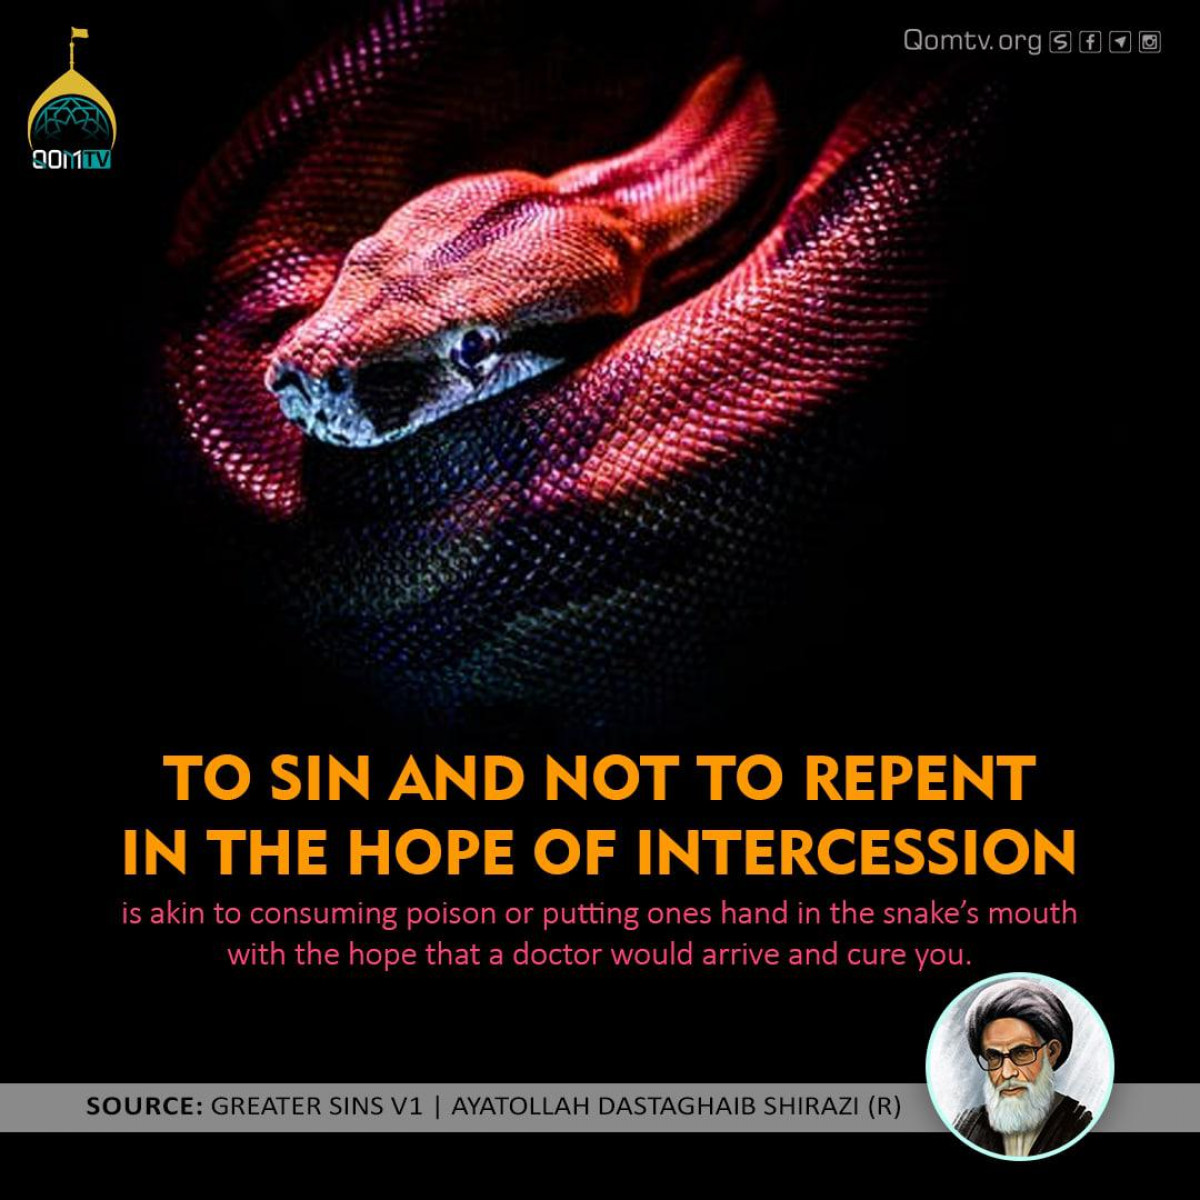 To sin and not to repent in the hope of intercession is